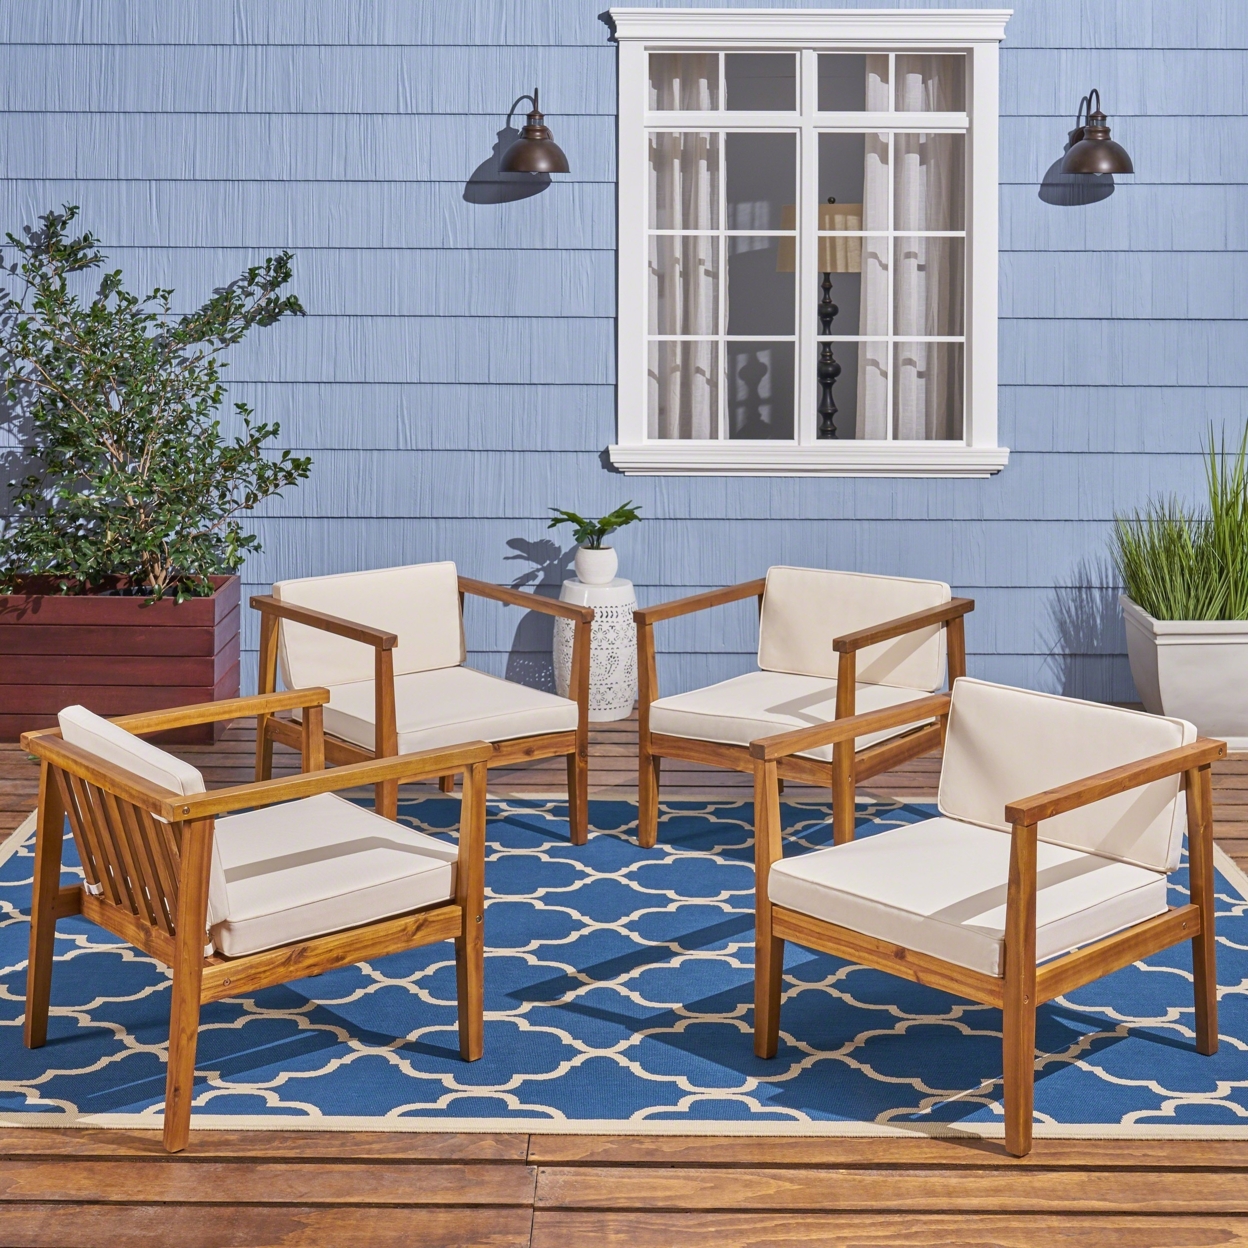 Thomson Outdoor Acacia Wood Club Chairs With Water-Resistant Cushions (Set Of 4) - Teak / Beige